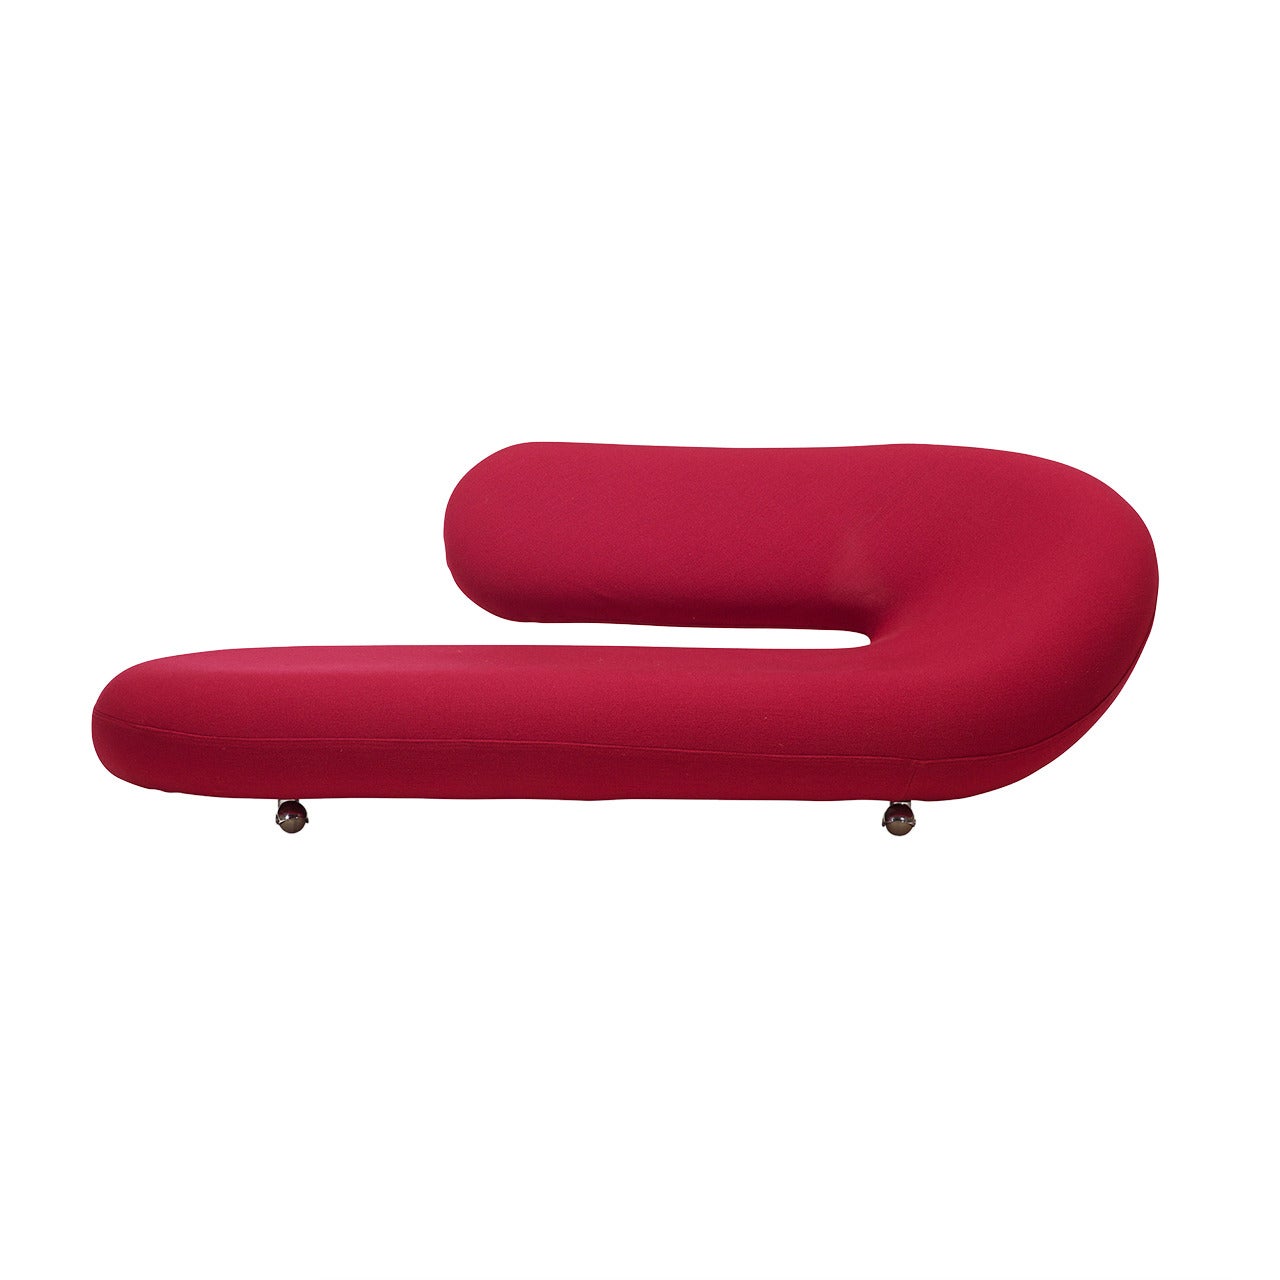 Cleopatra Chaise Lounge by Geoffrey Harcourt for Artifort